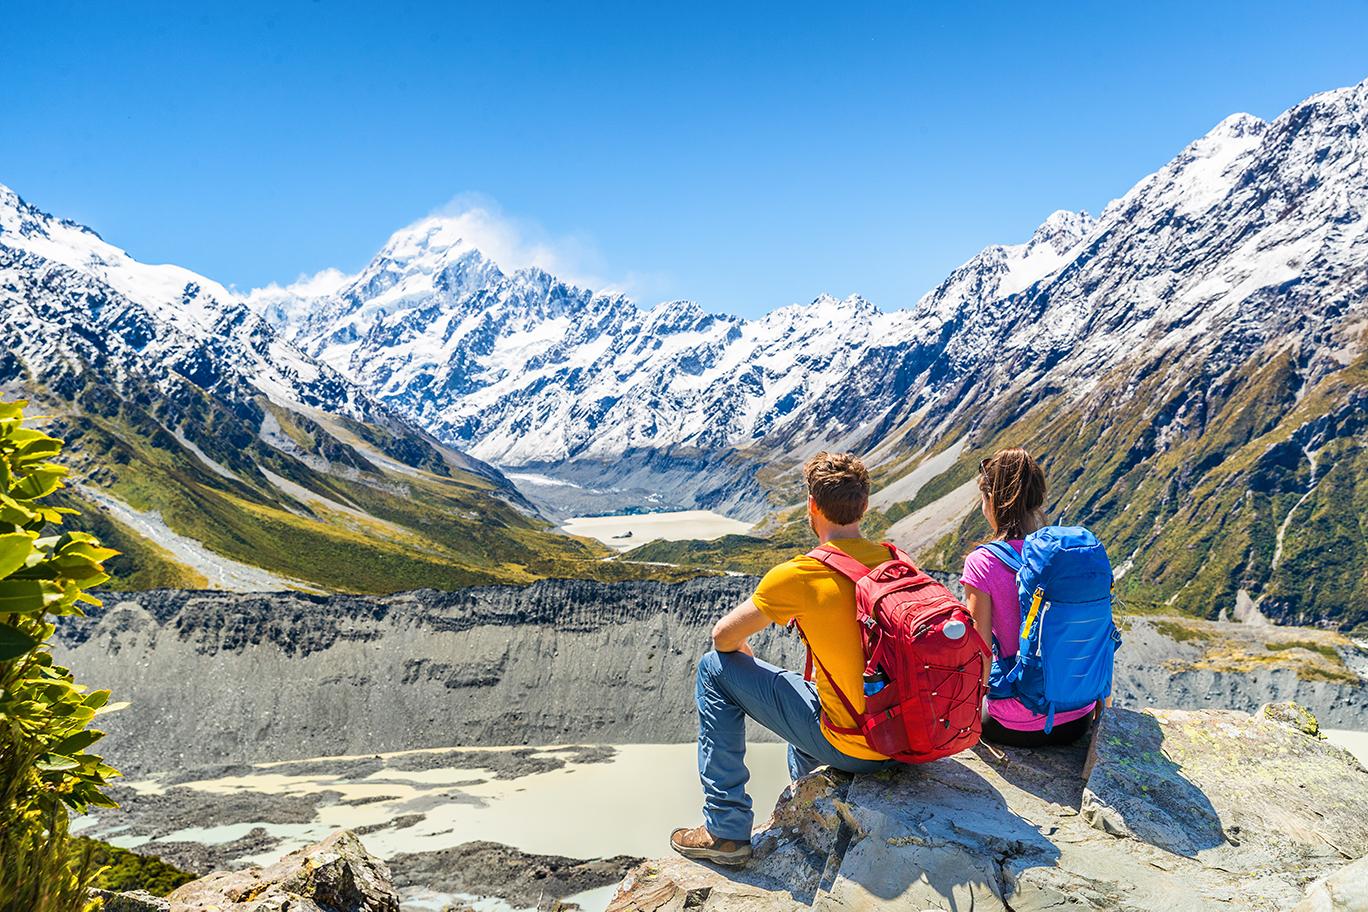 From cities and coastlines to beautiful mountain hikes, experience New Zealand tours & excursions